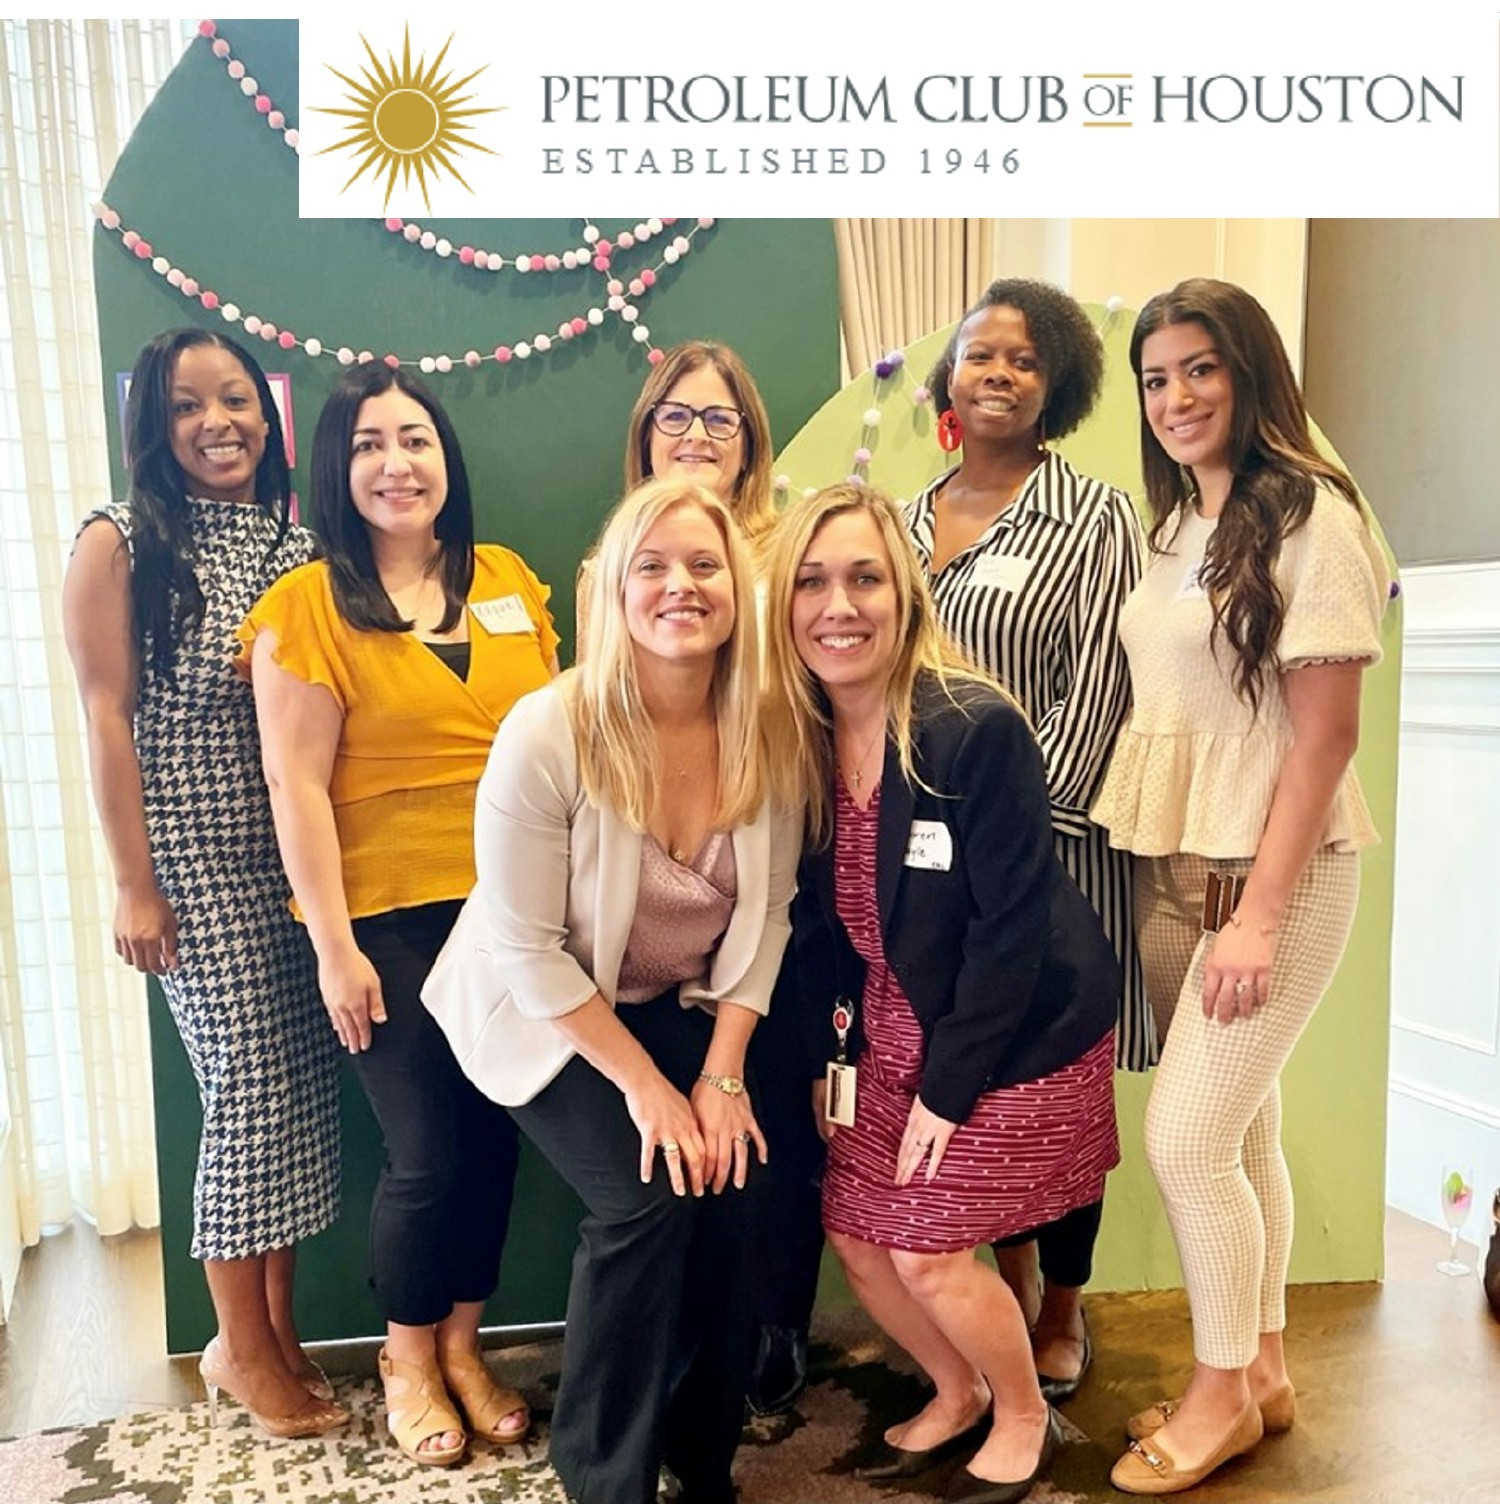 EAG sponsors the International Women's day event at the Petroleum Club of Houston.